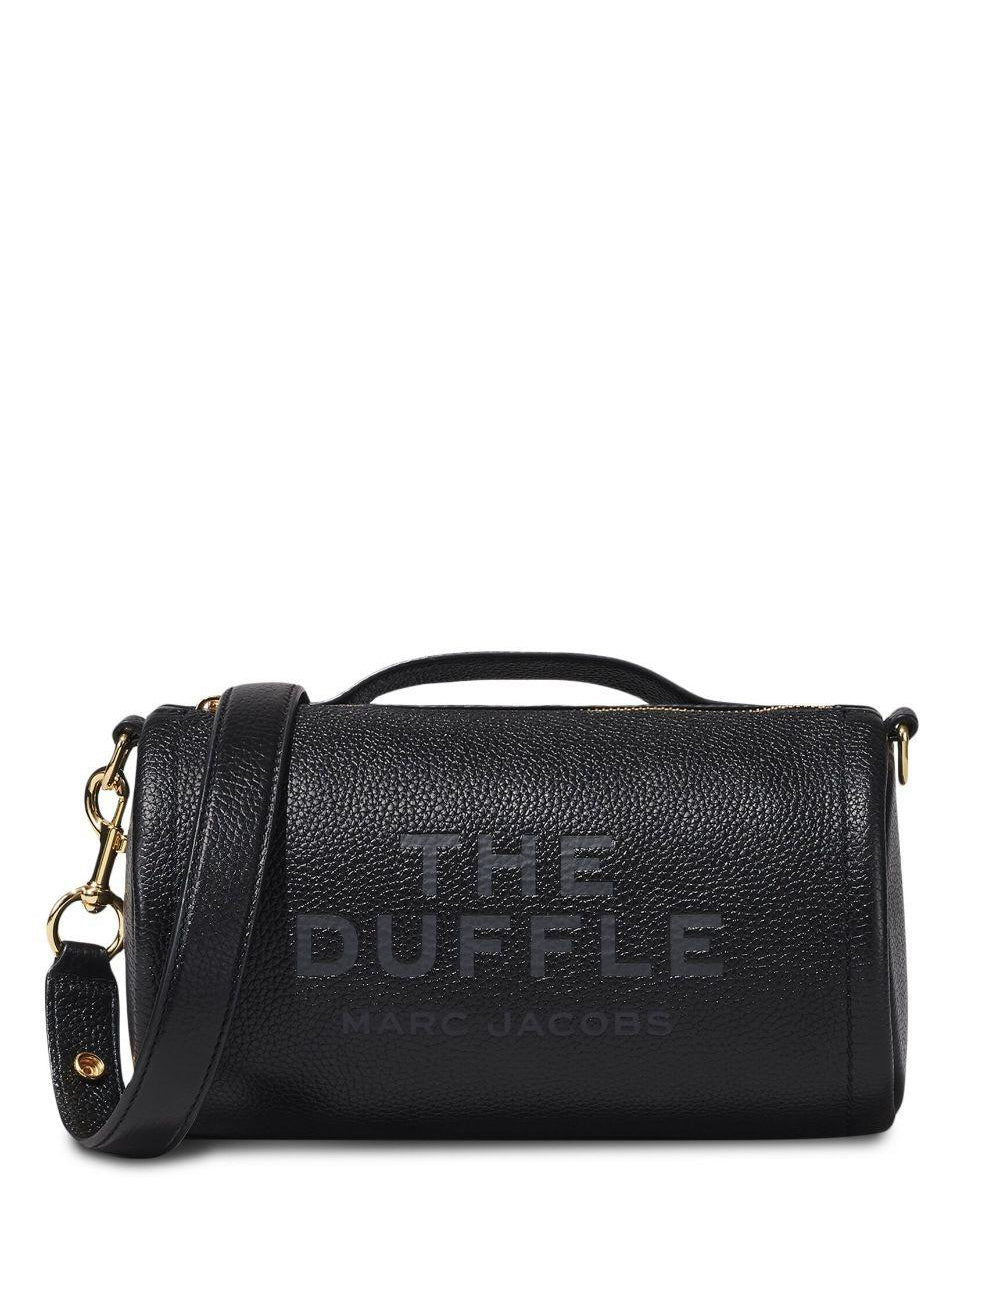 MARC JACOBS THE DUFFLE